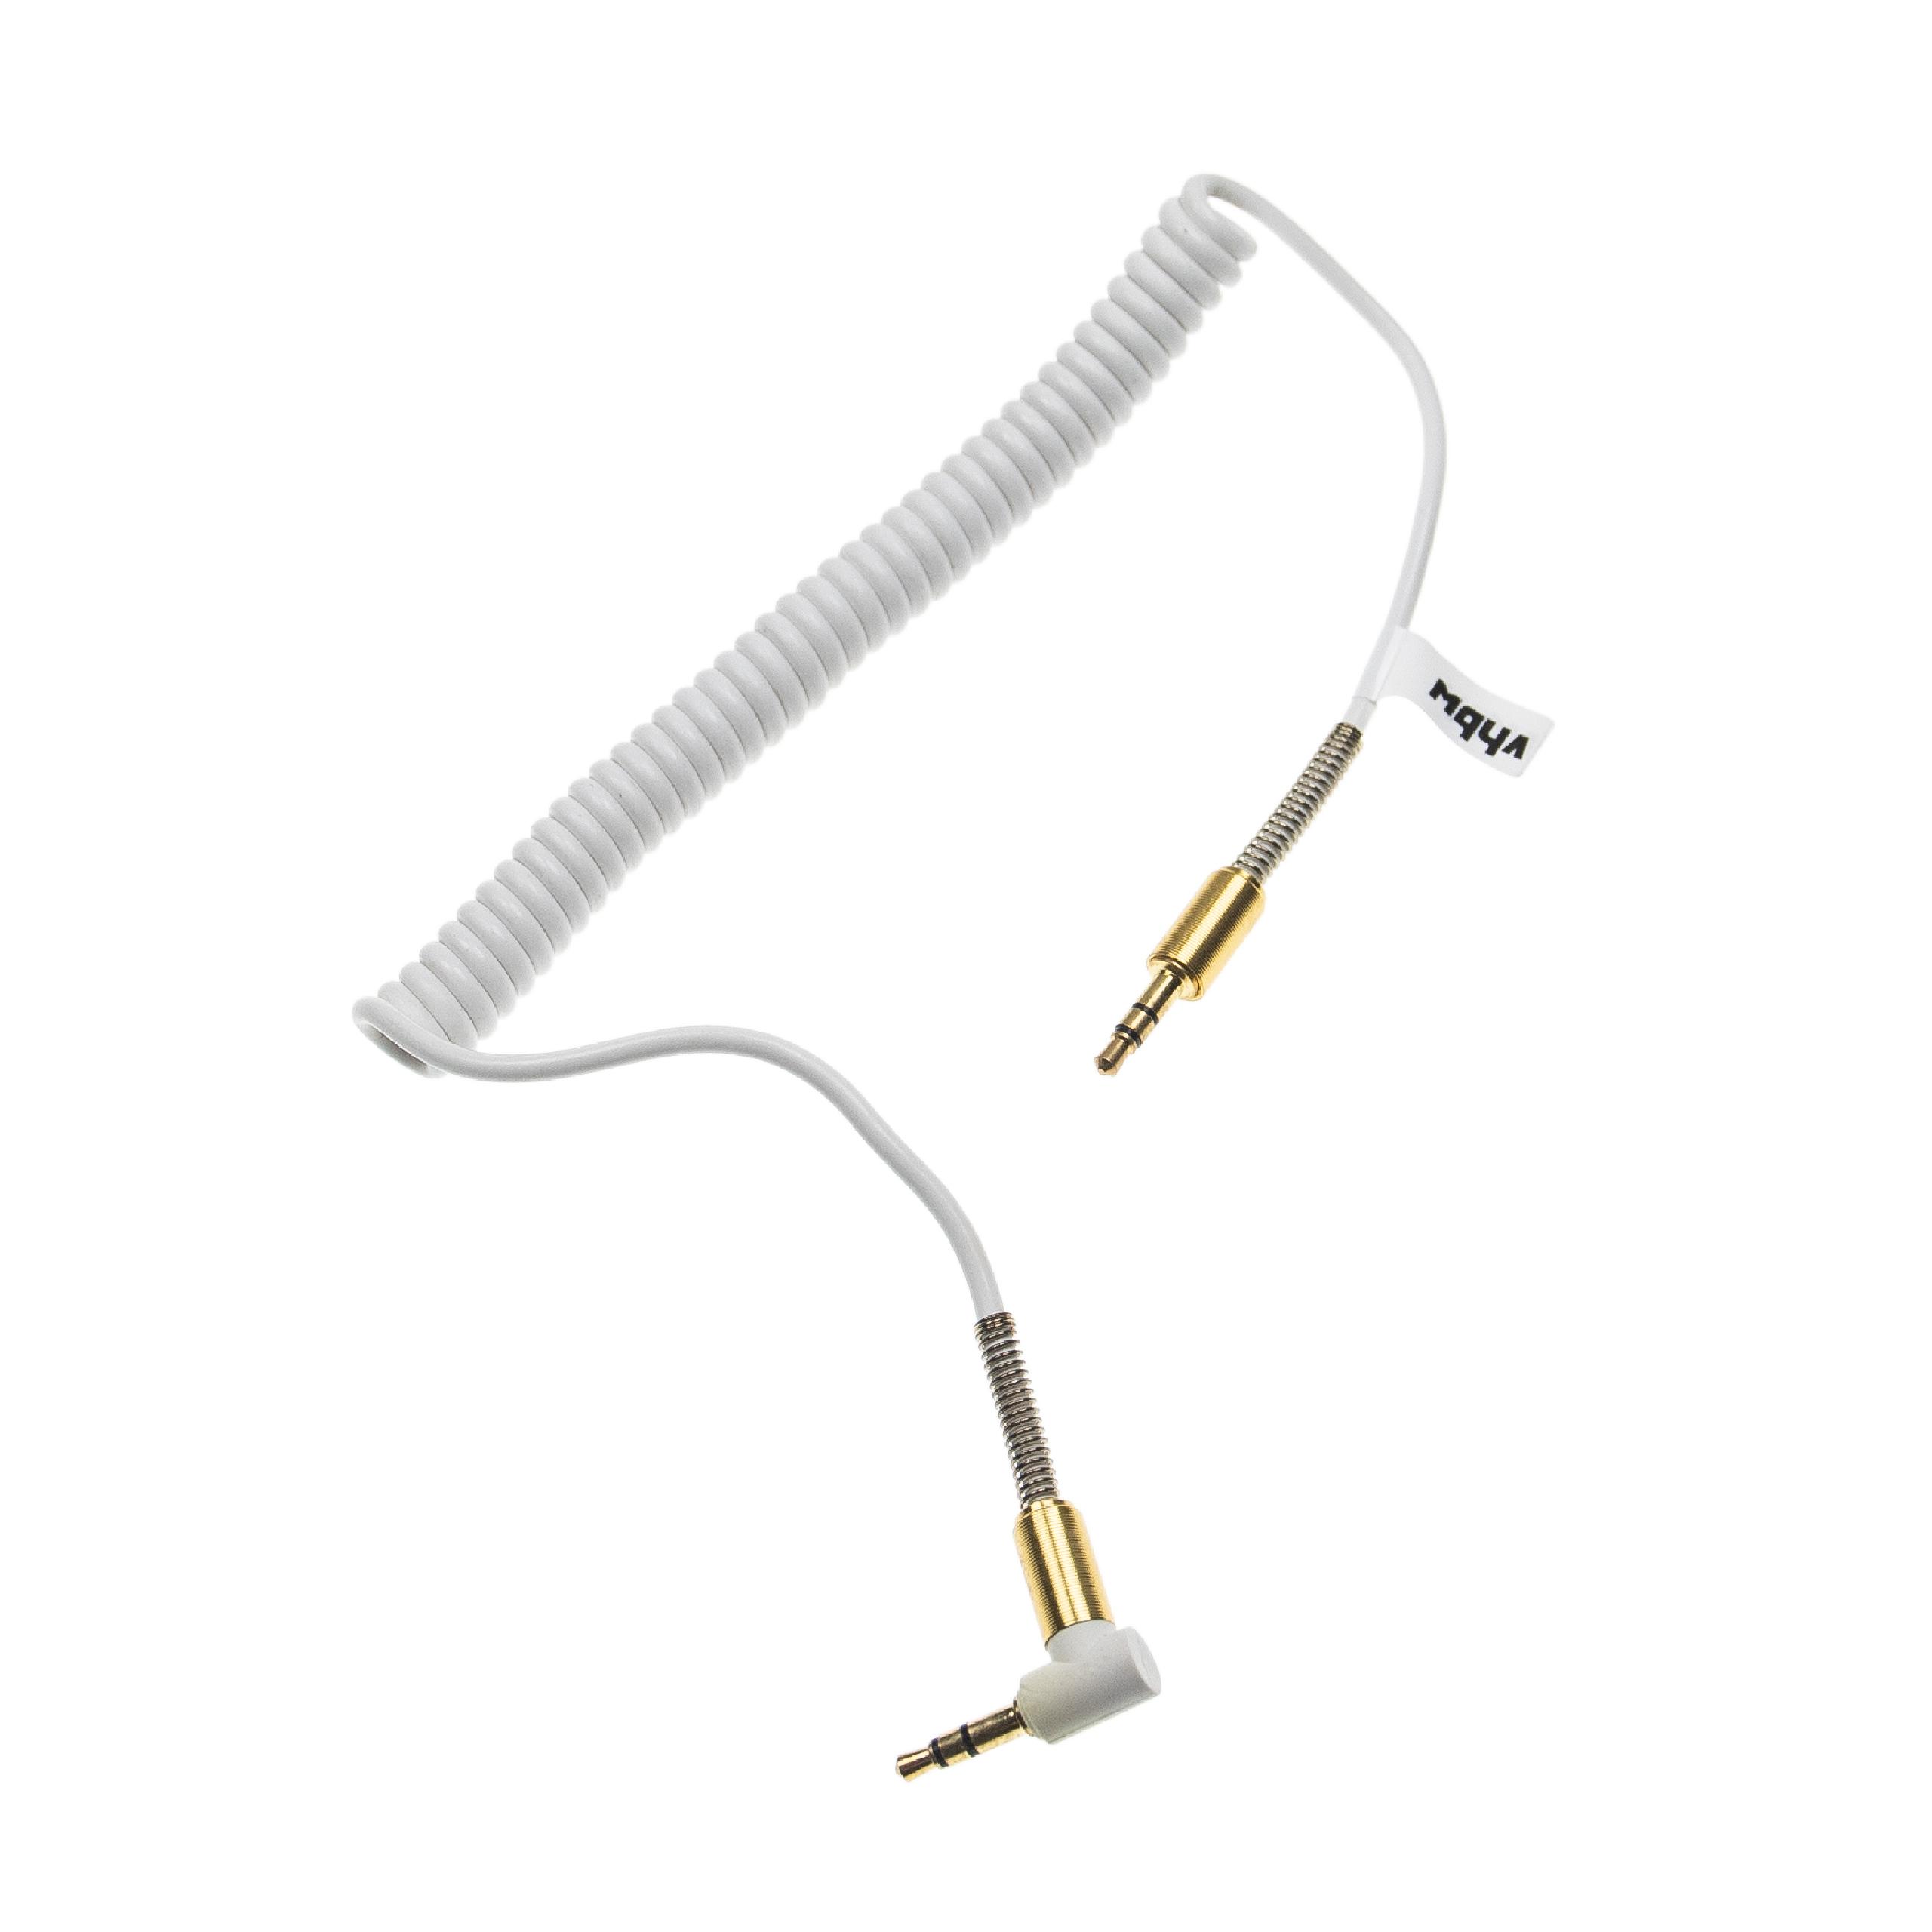 Stereo AUX Audio Cable Jack Adapter 3.5mm to 3.5mm - male to male, gold plated, right angle, gold / white